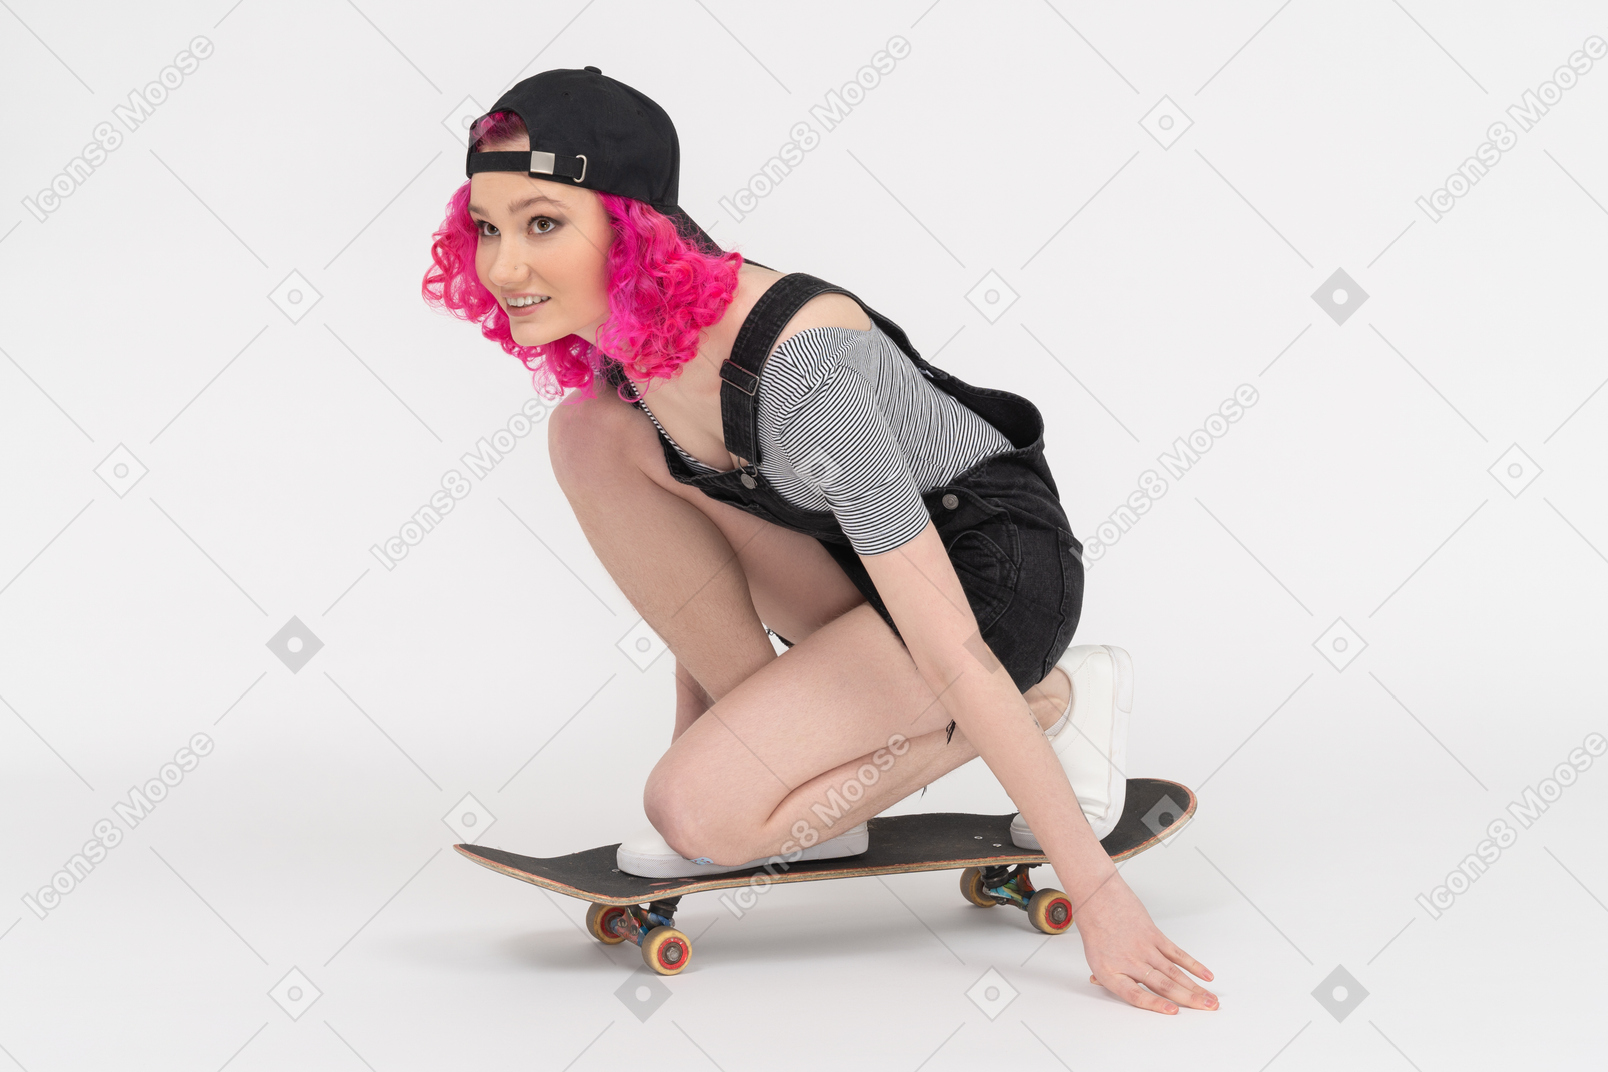 Cheerful girl riding a skateboard down on her knees